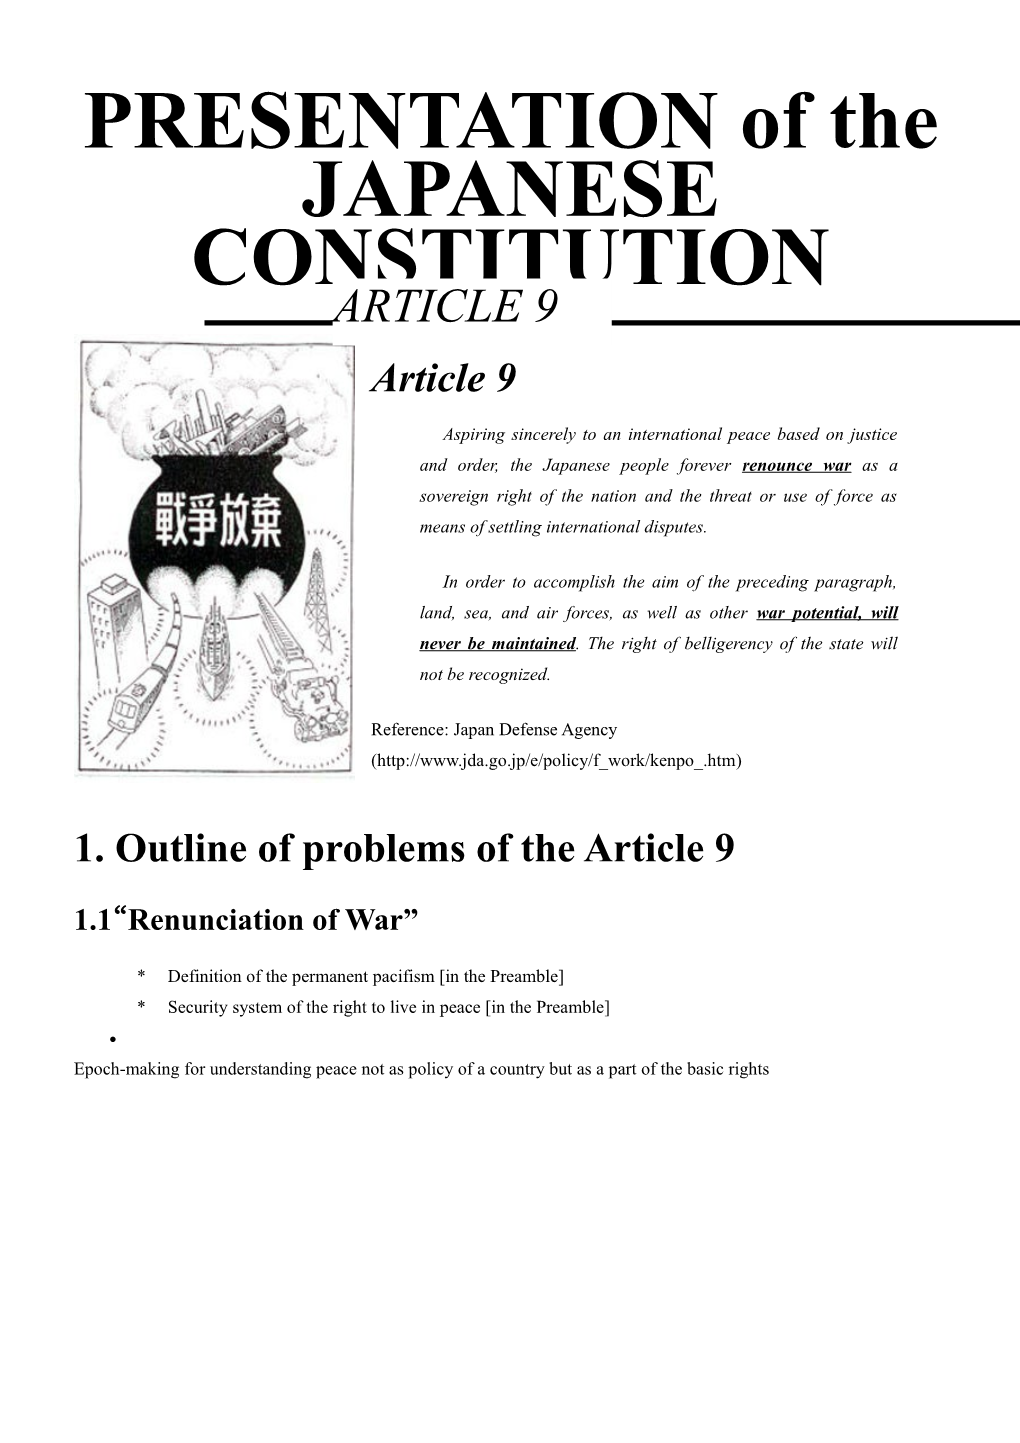 PRESENTATION of the JAPANESE CONSTITUTION